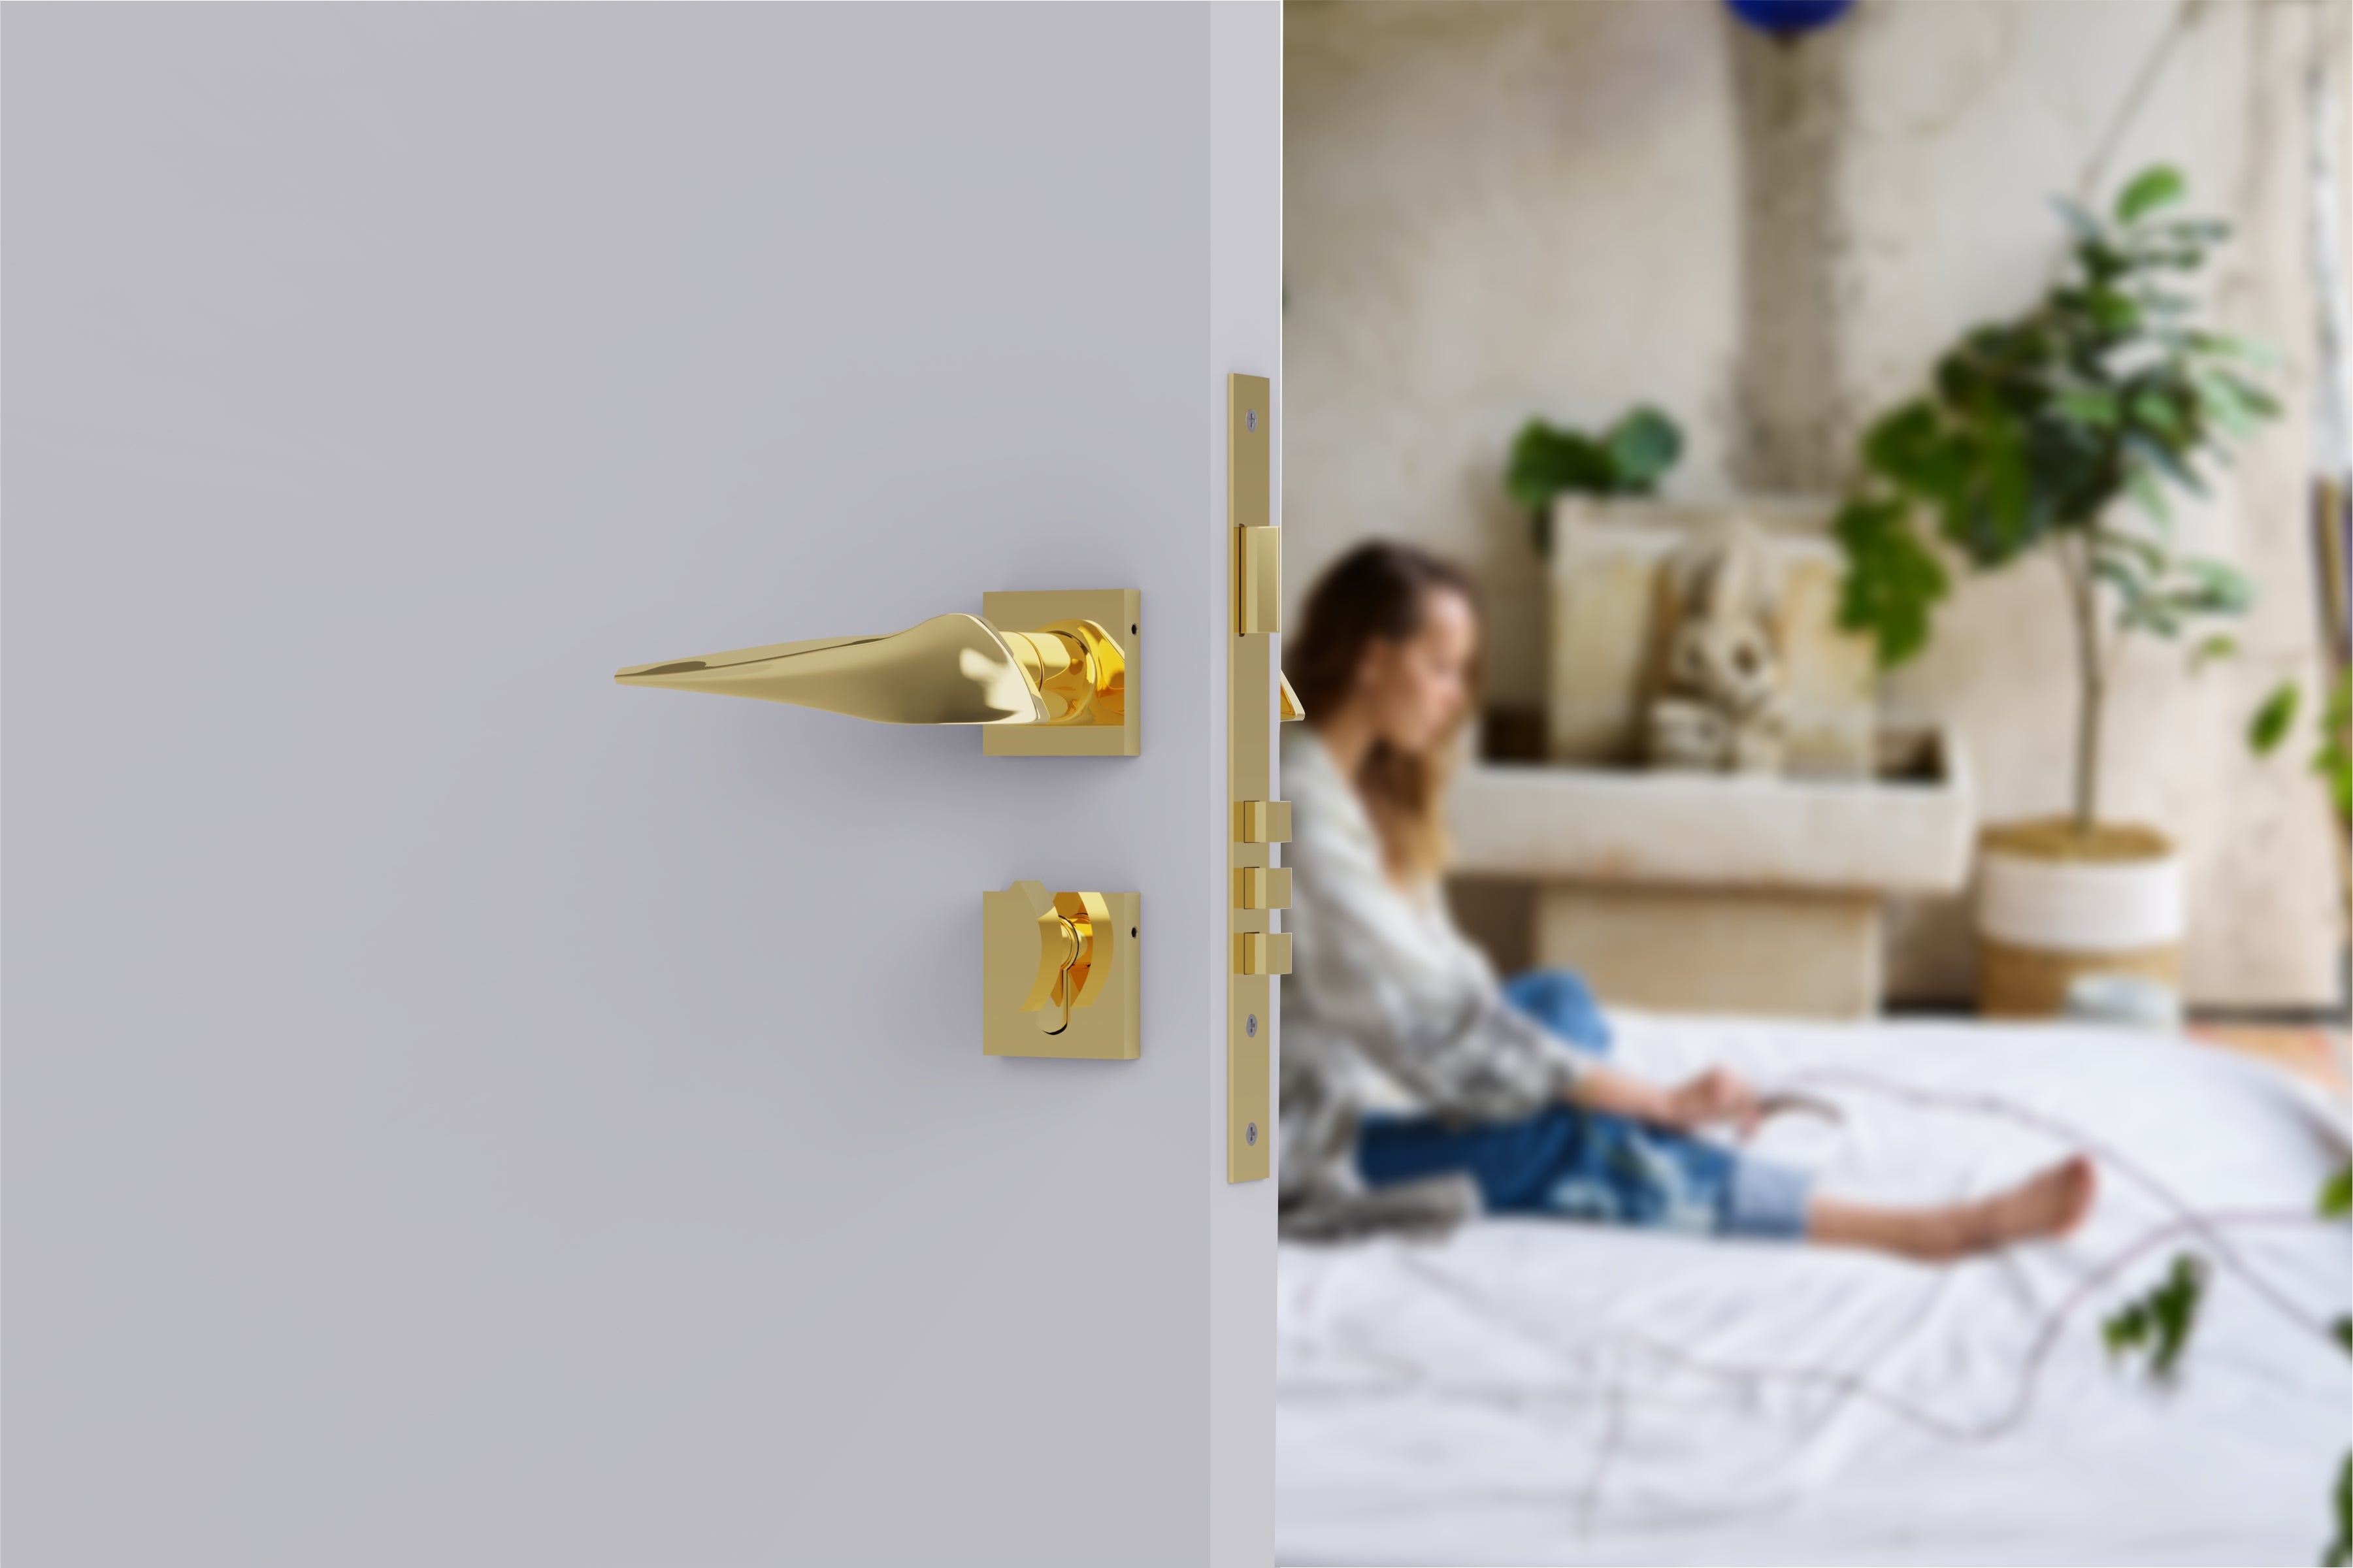 Mortise Locks Main Door Lock Handles Set with 3 Brass Key for Home, Office, Hotel-by GLOXY®